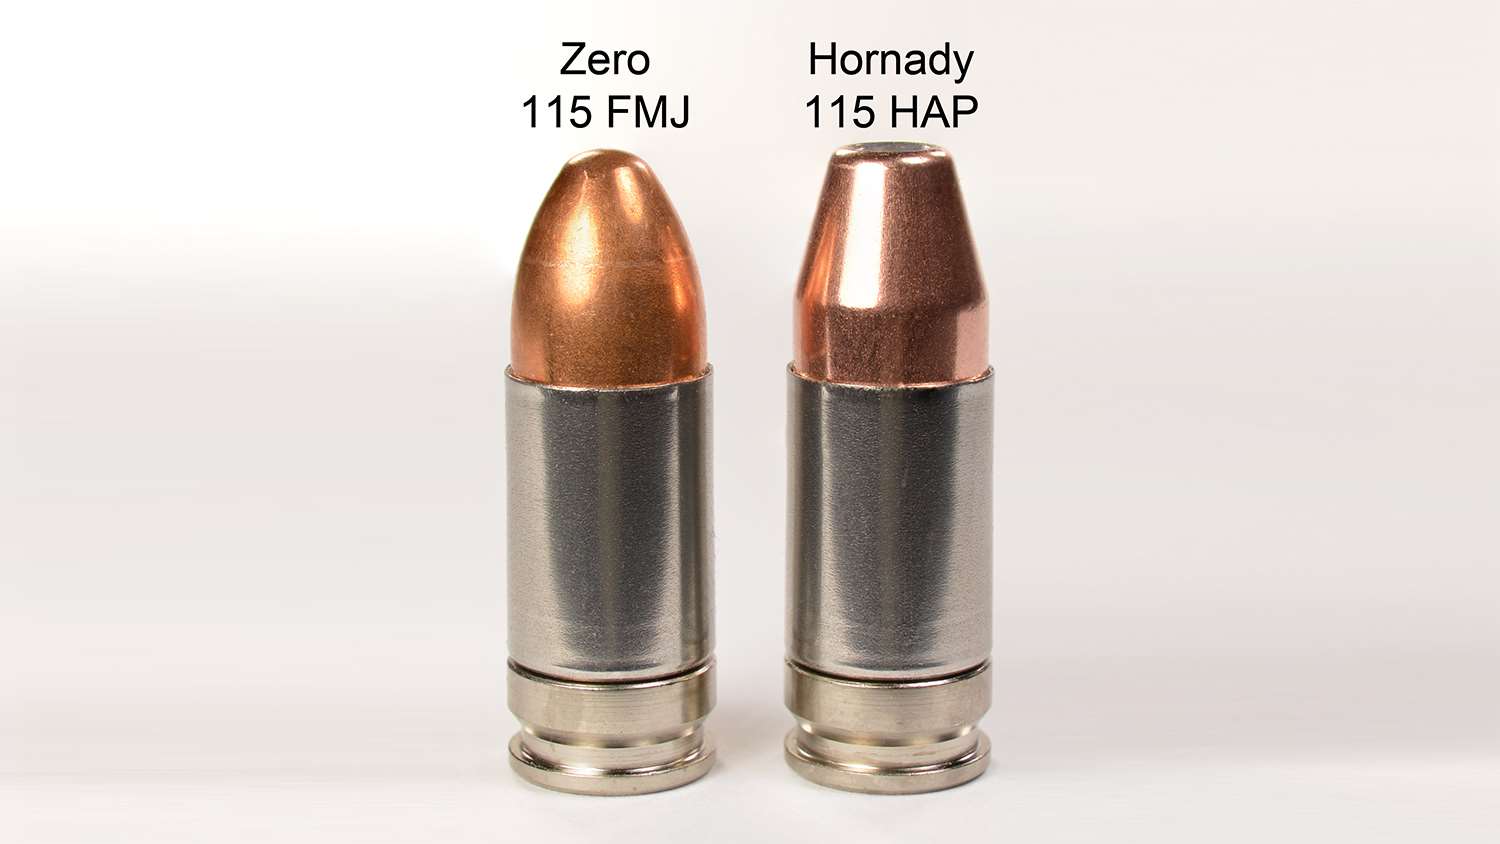 Two 9 Major loads: one with a Zero FMJ bullet and the other with a Hornady HAP bullet.